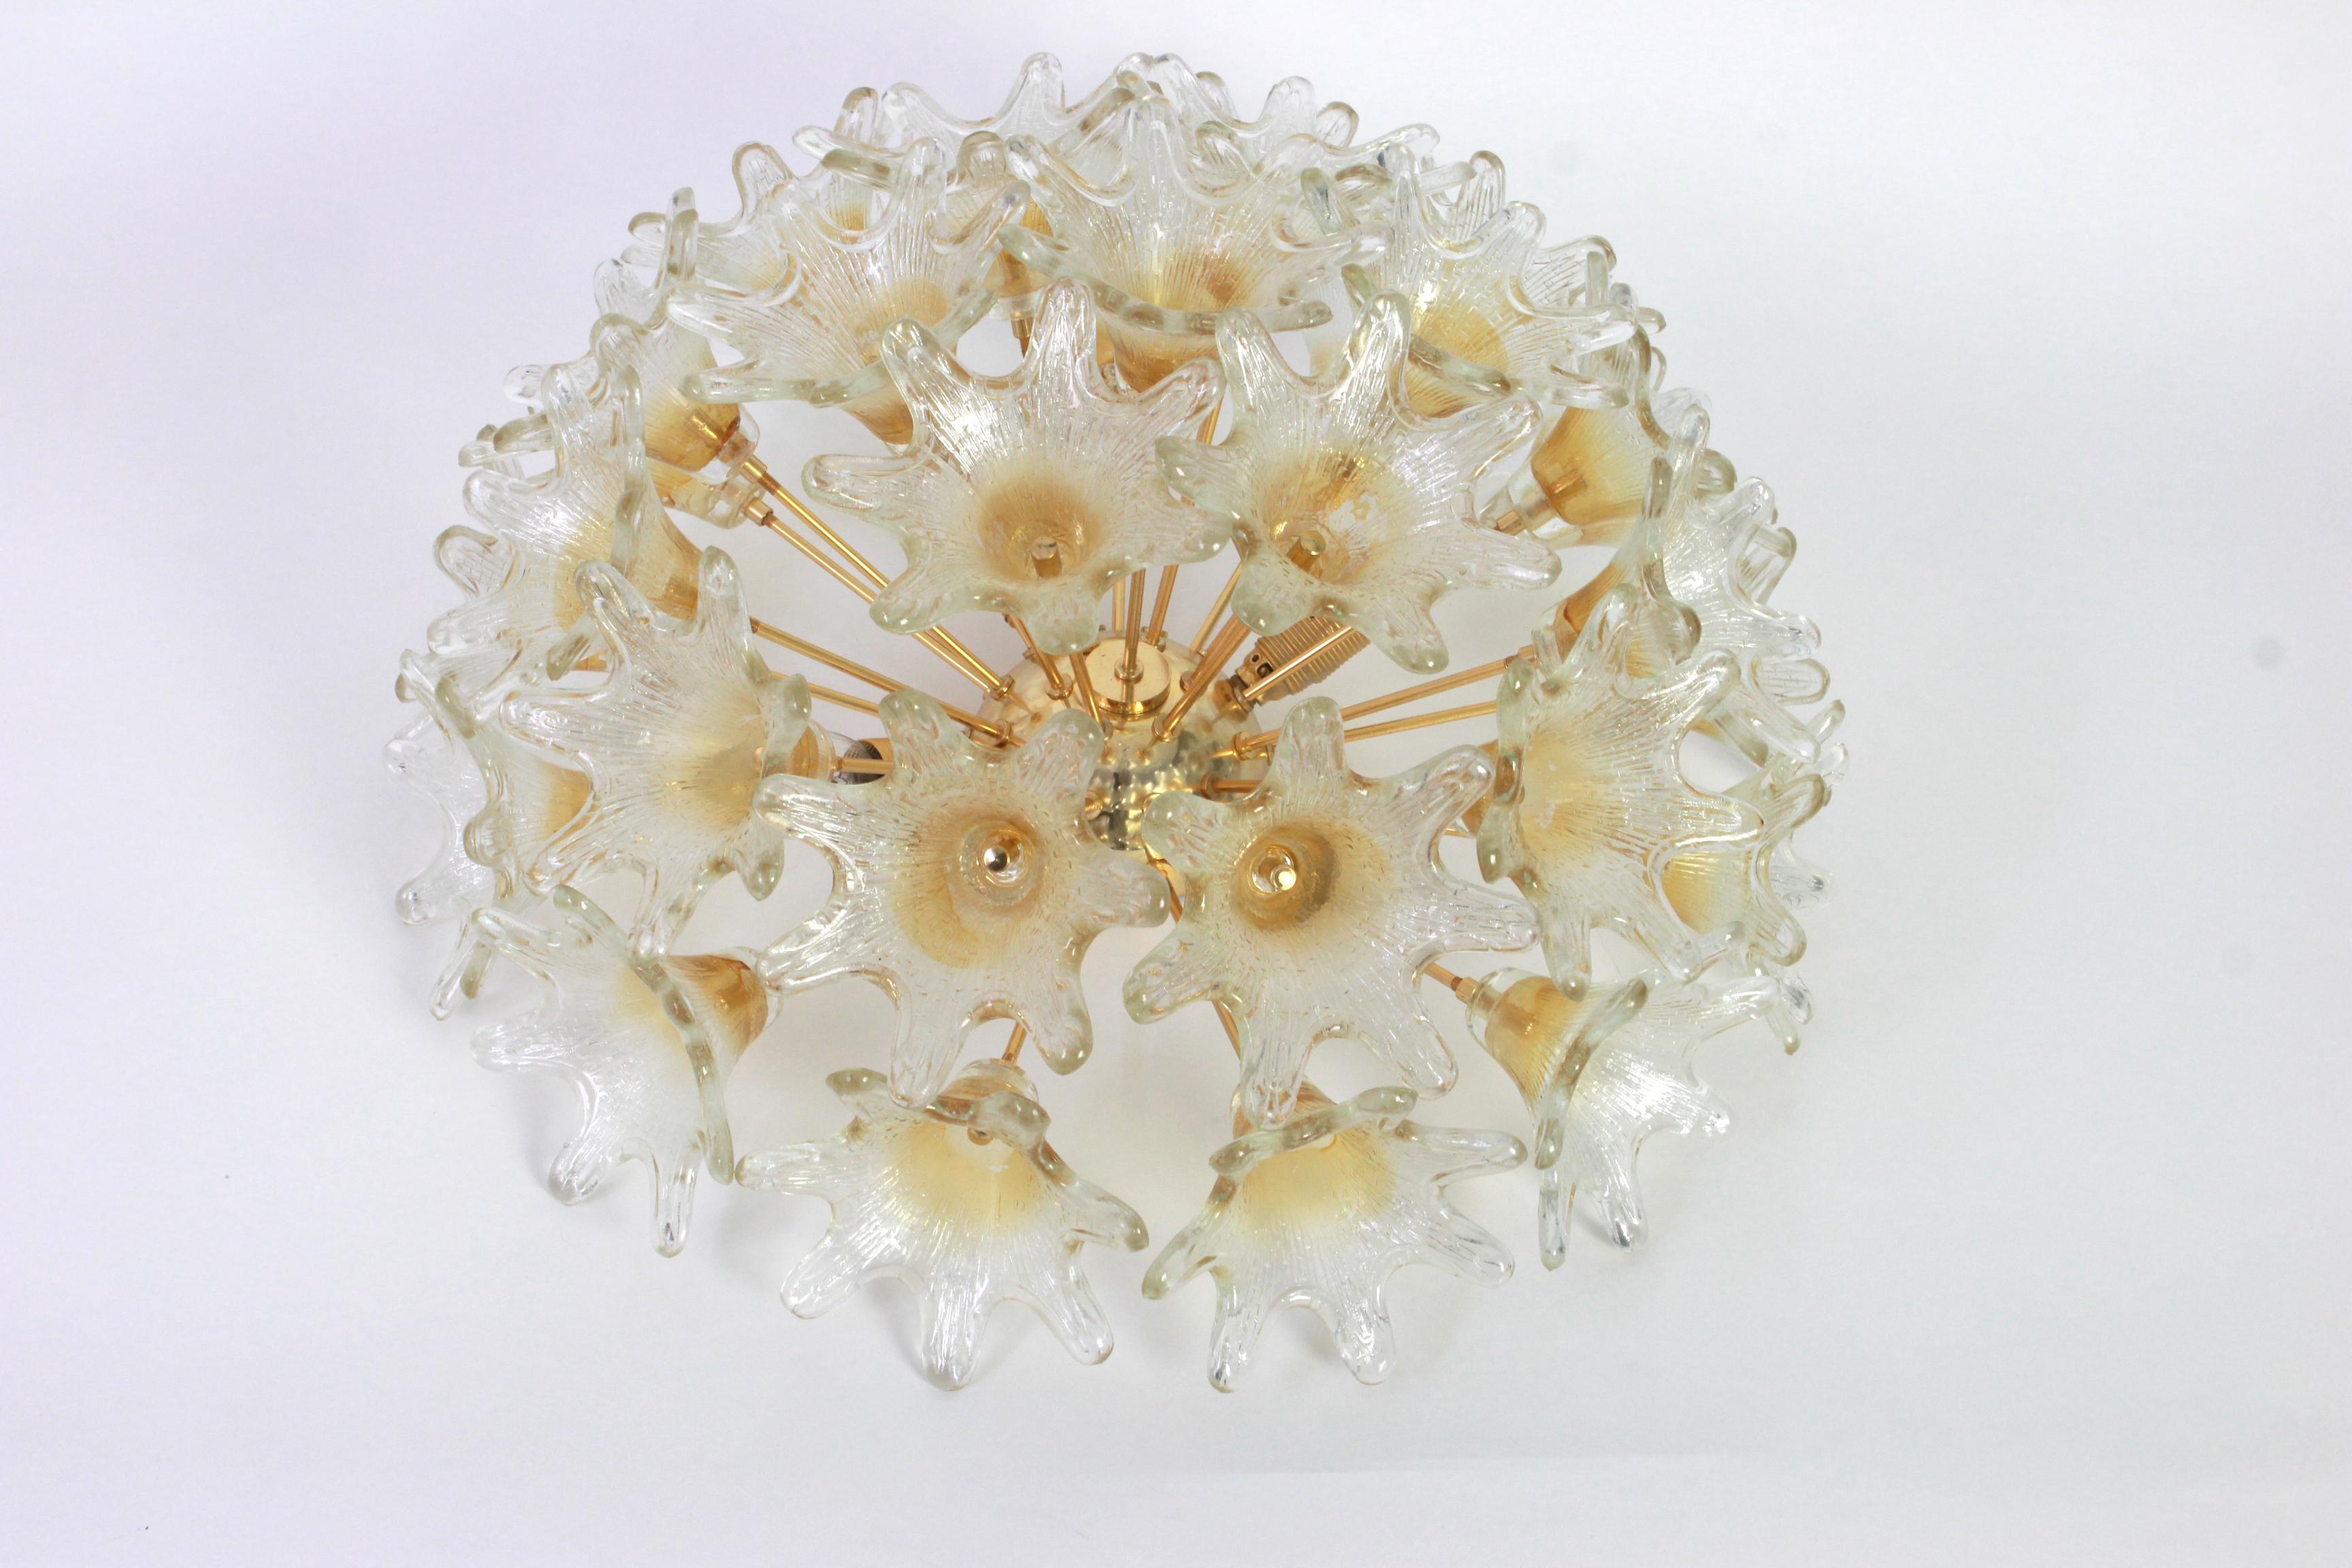 Spectacular Murano glass and brass sunburst flower flush mount by Venini for VeArt, Italy, 1970s
Stunning shape and great light effect.
All glasses are in good condition.
It needs 4 small size bulbs (E-14 bulbs) up to 40 watts each and is